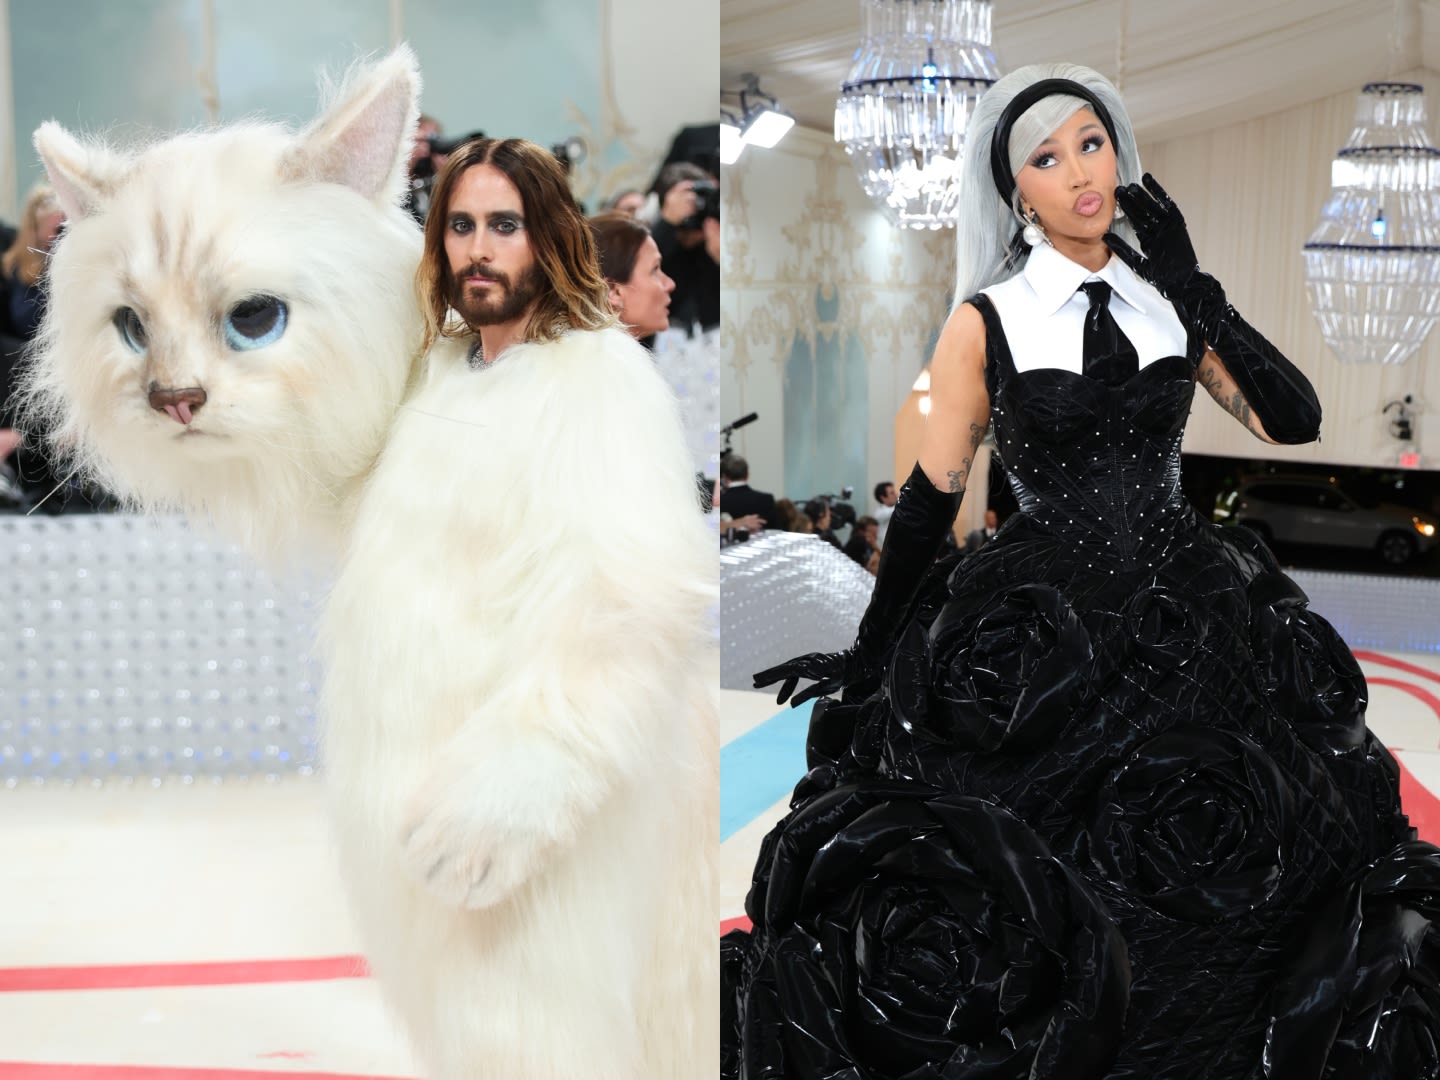 Most Dramatic Looks at the Met Gala Over the Years: Photos